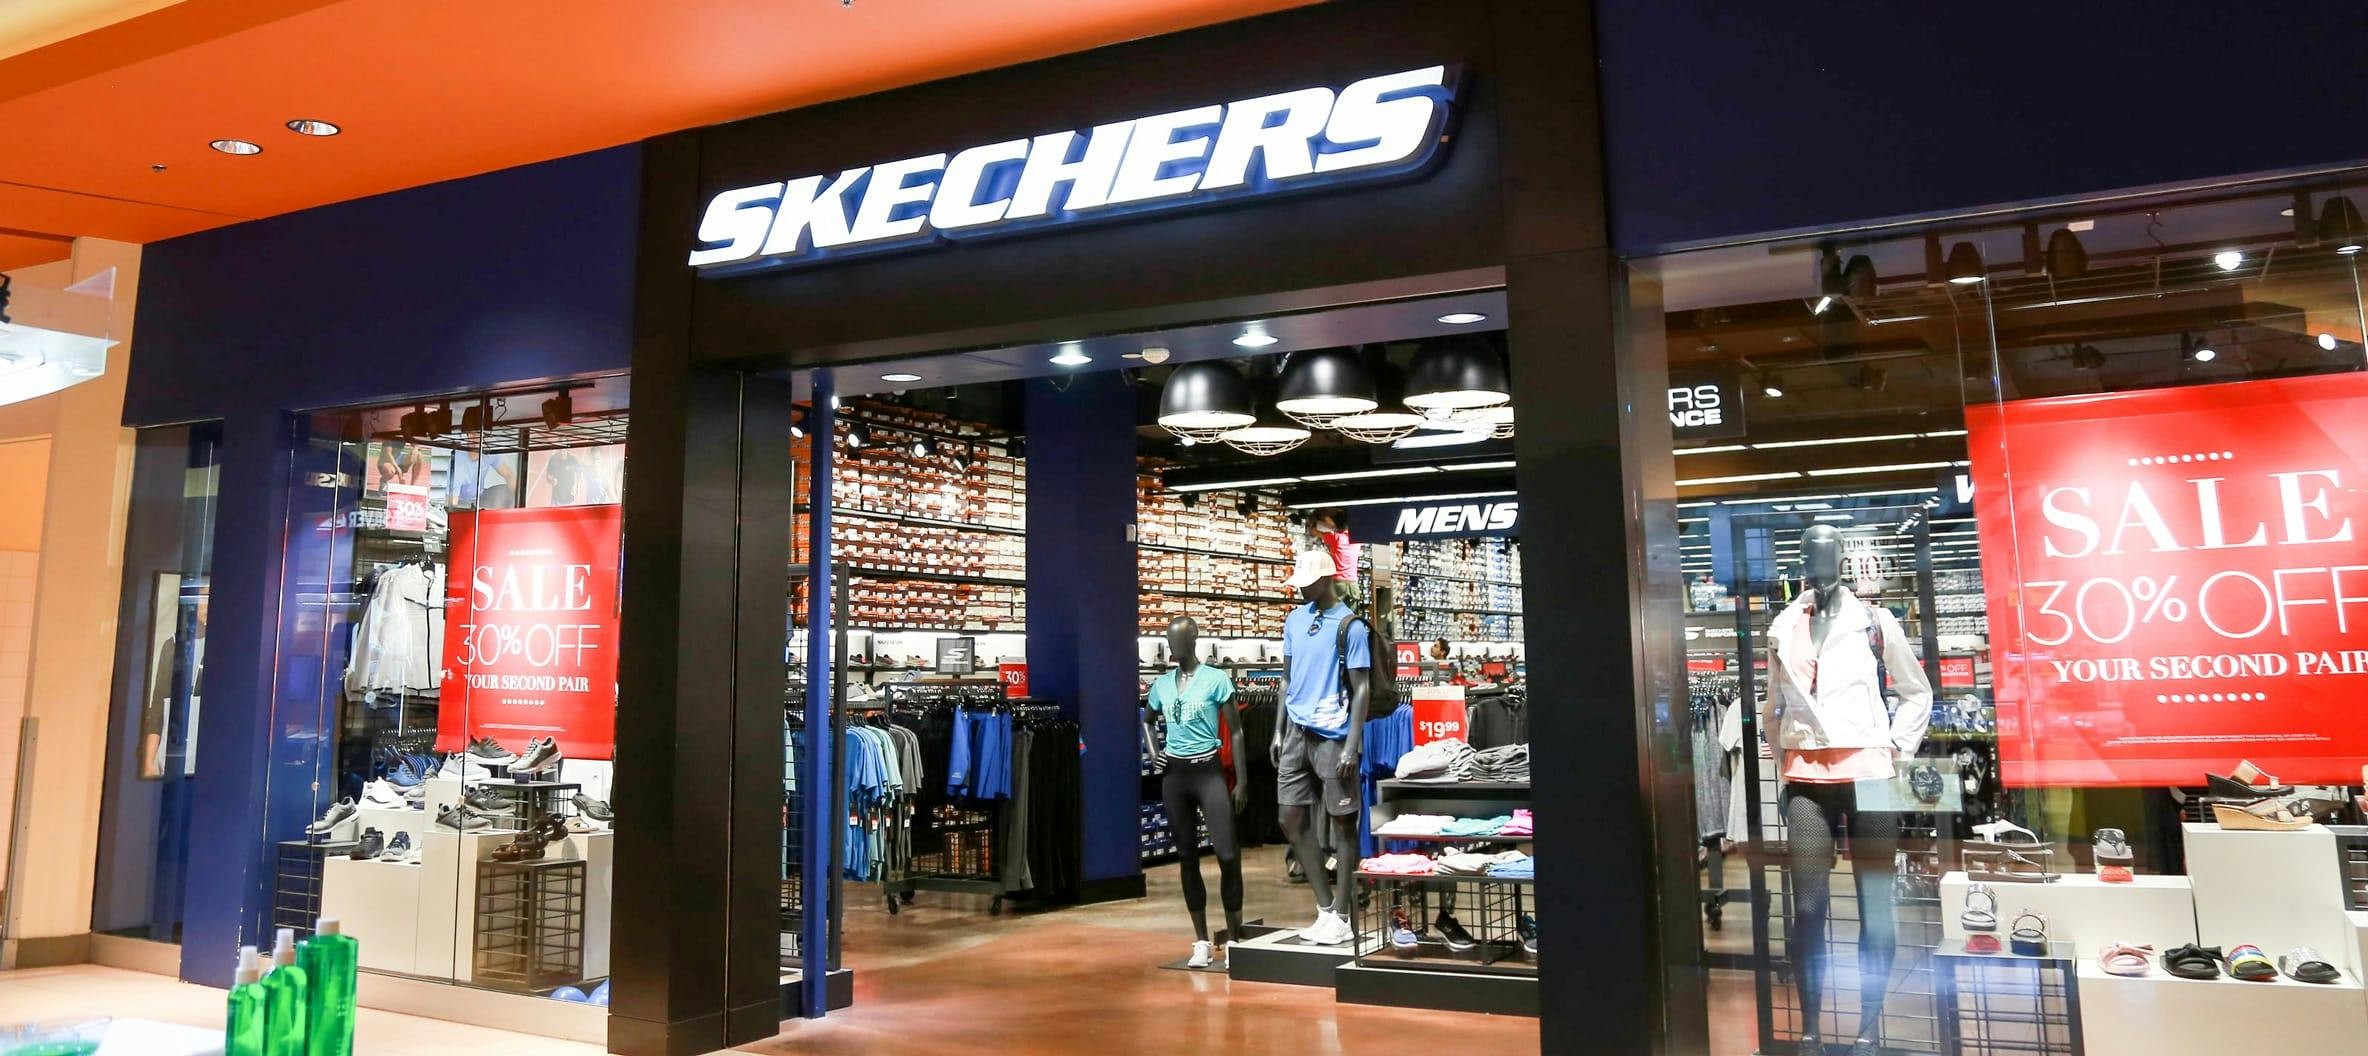 Skechers USA Outlet | Miami Dolphin Mall